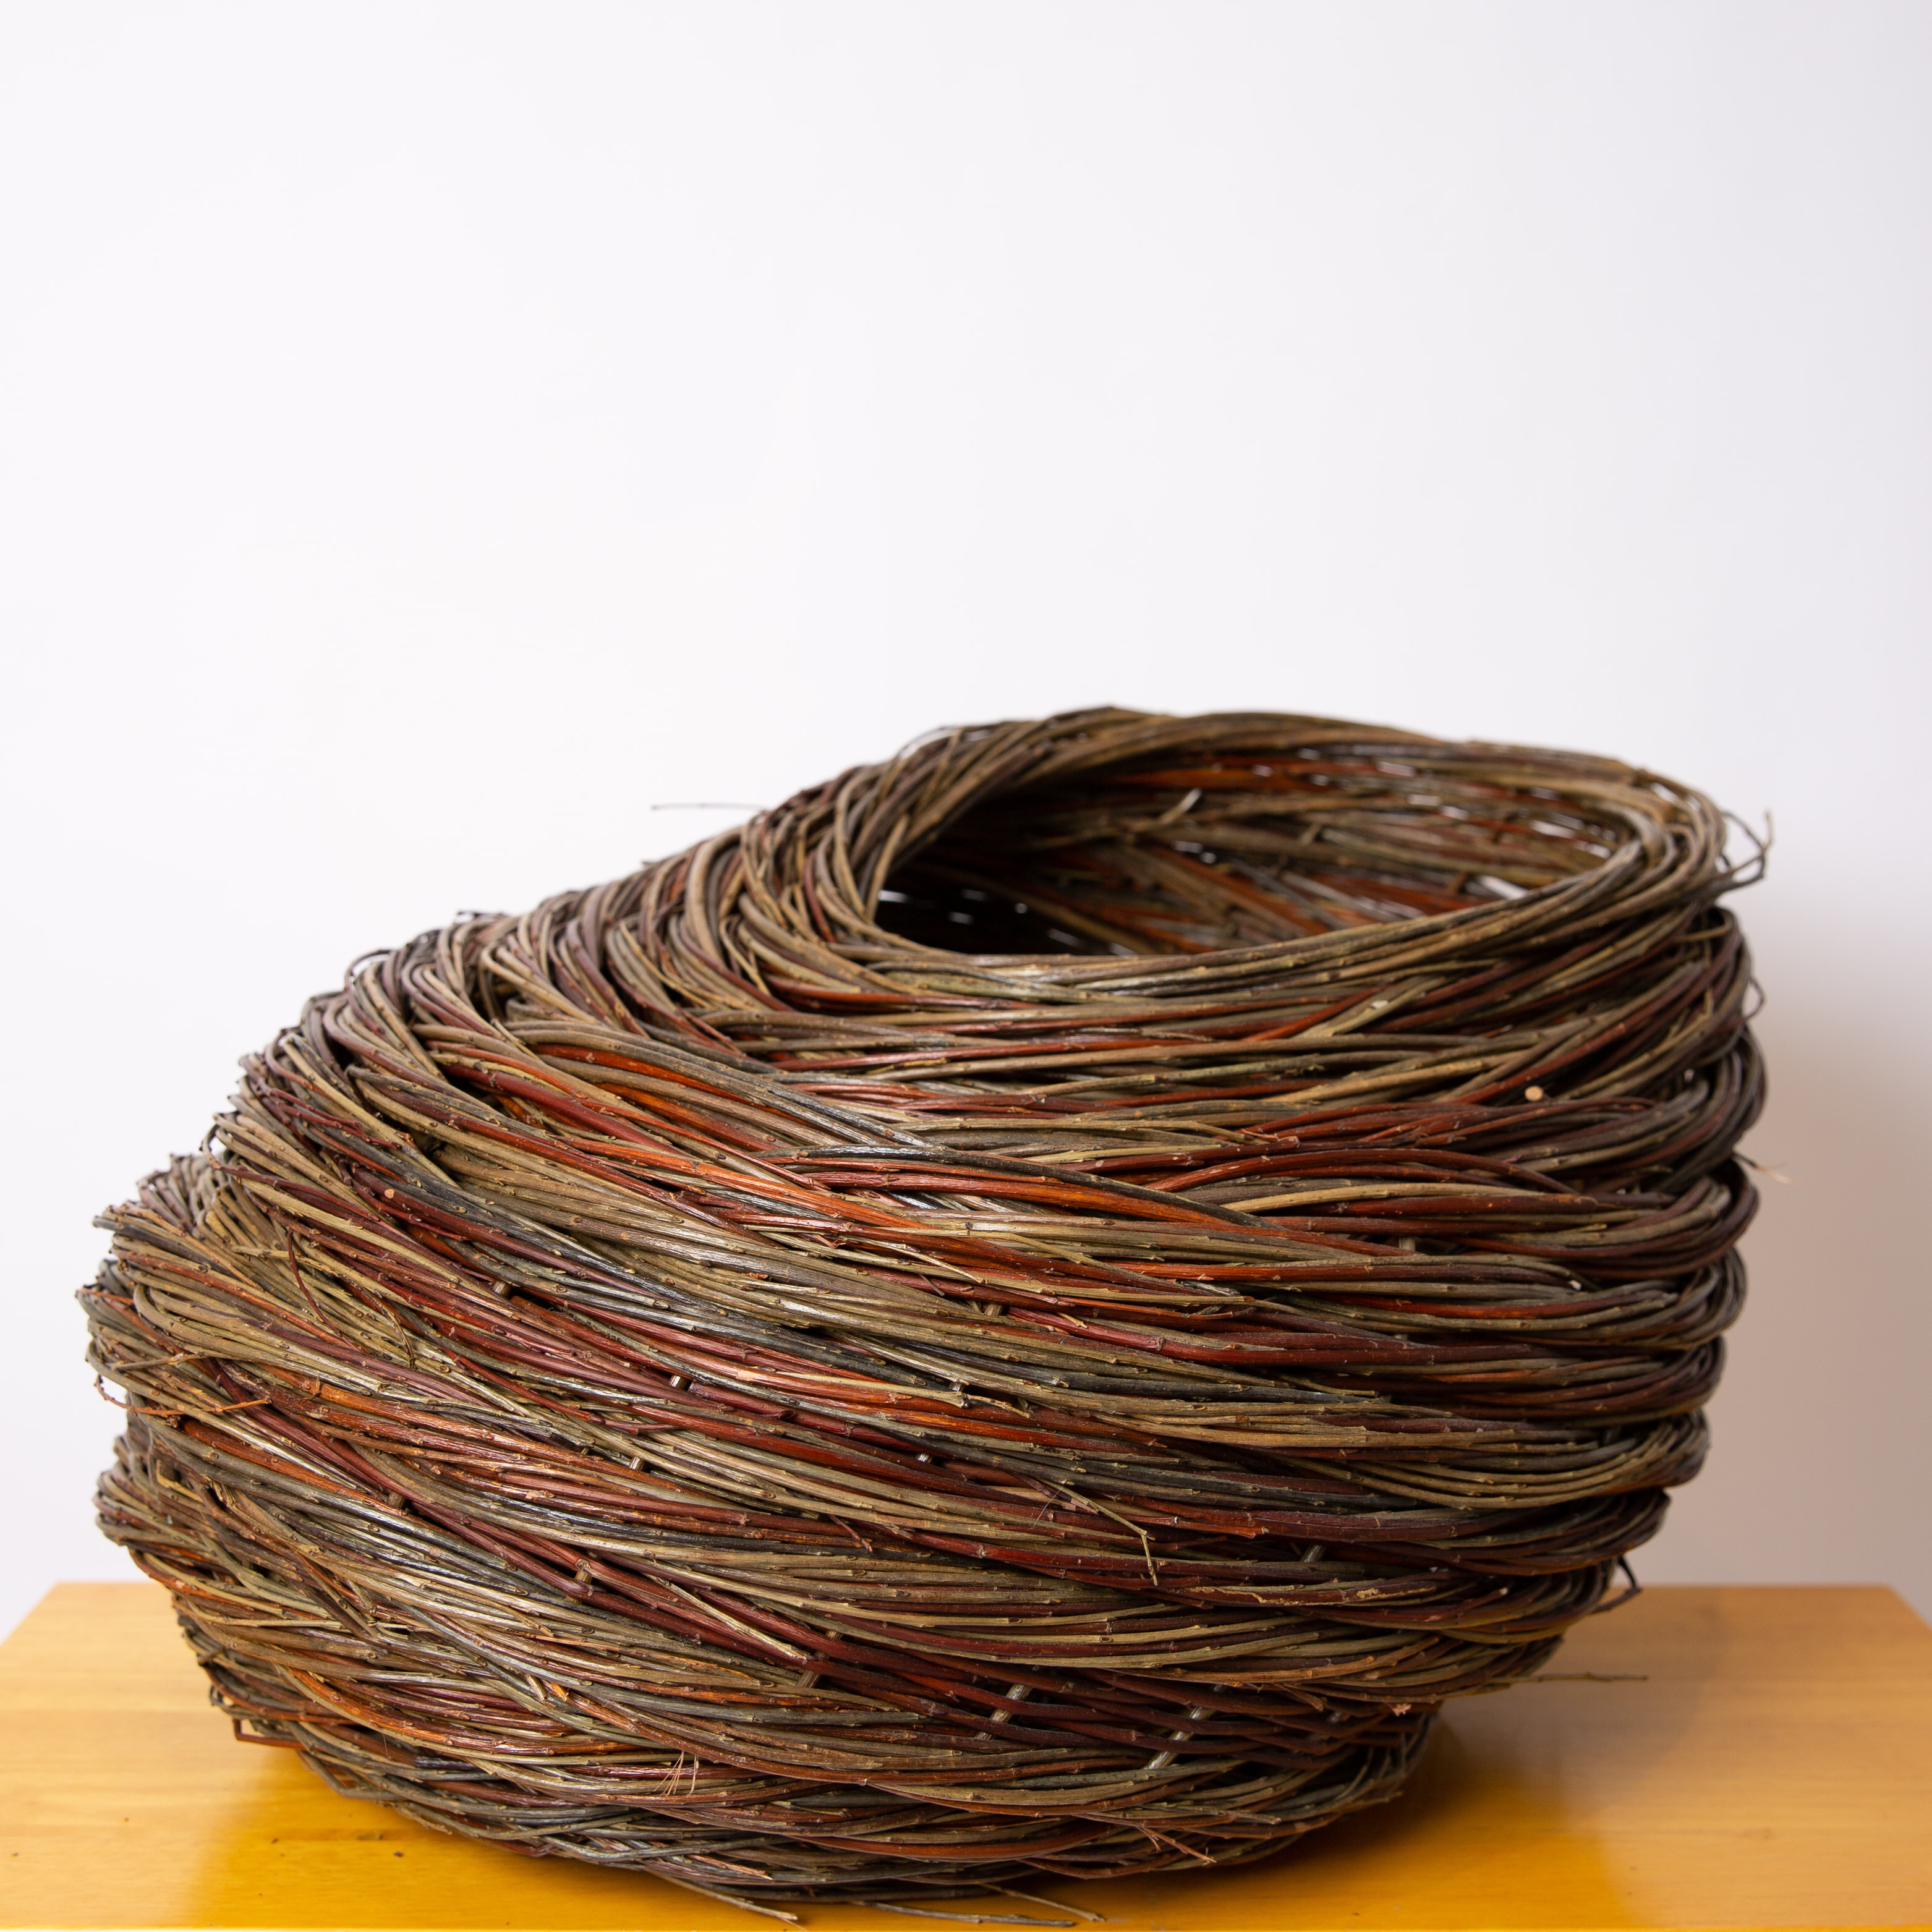 A photograph of our roped coil offset basket.